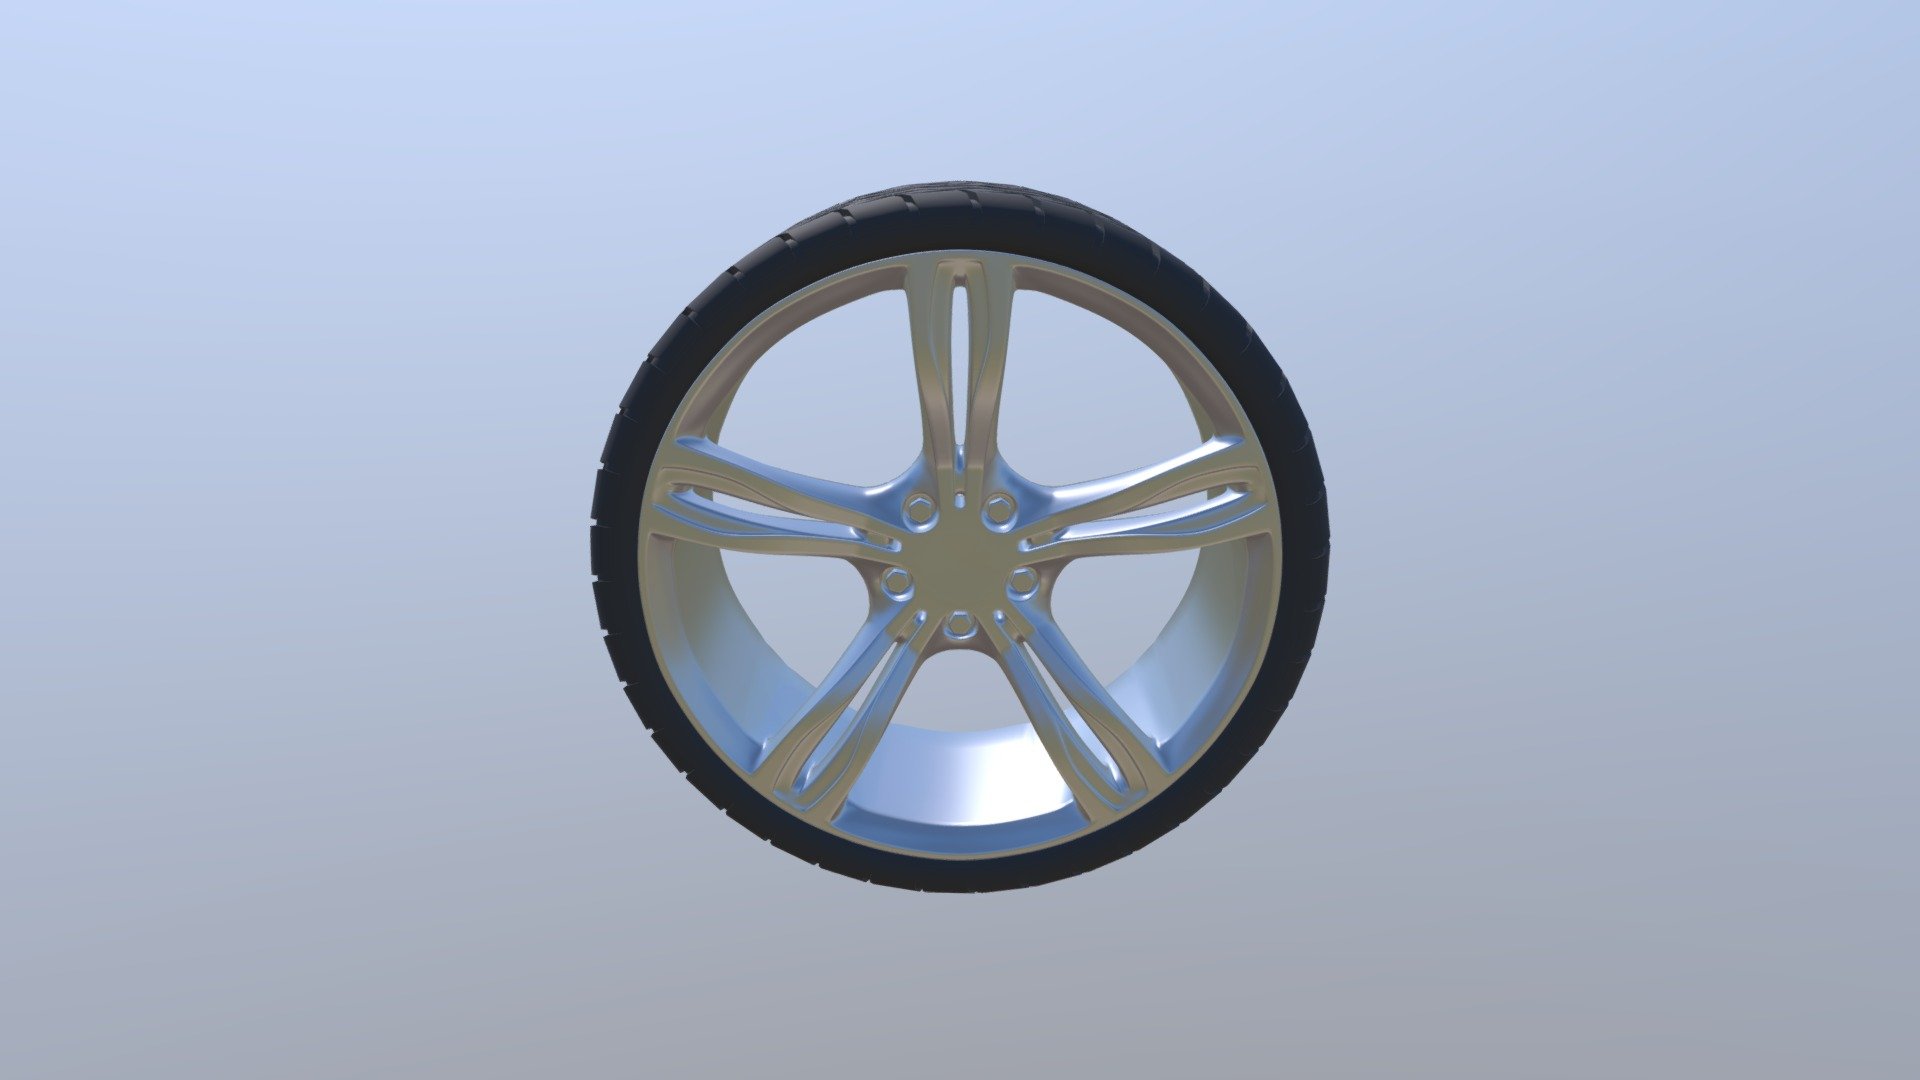 Submission for the Modeling a Wheel exercise on CG Cookie.

Based off a BMW rim design.

Topology is a little janky apologies in advance 3d model